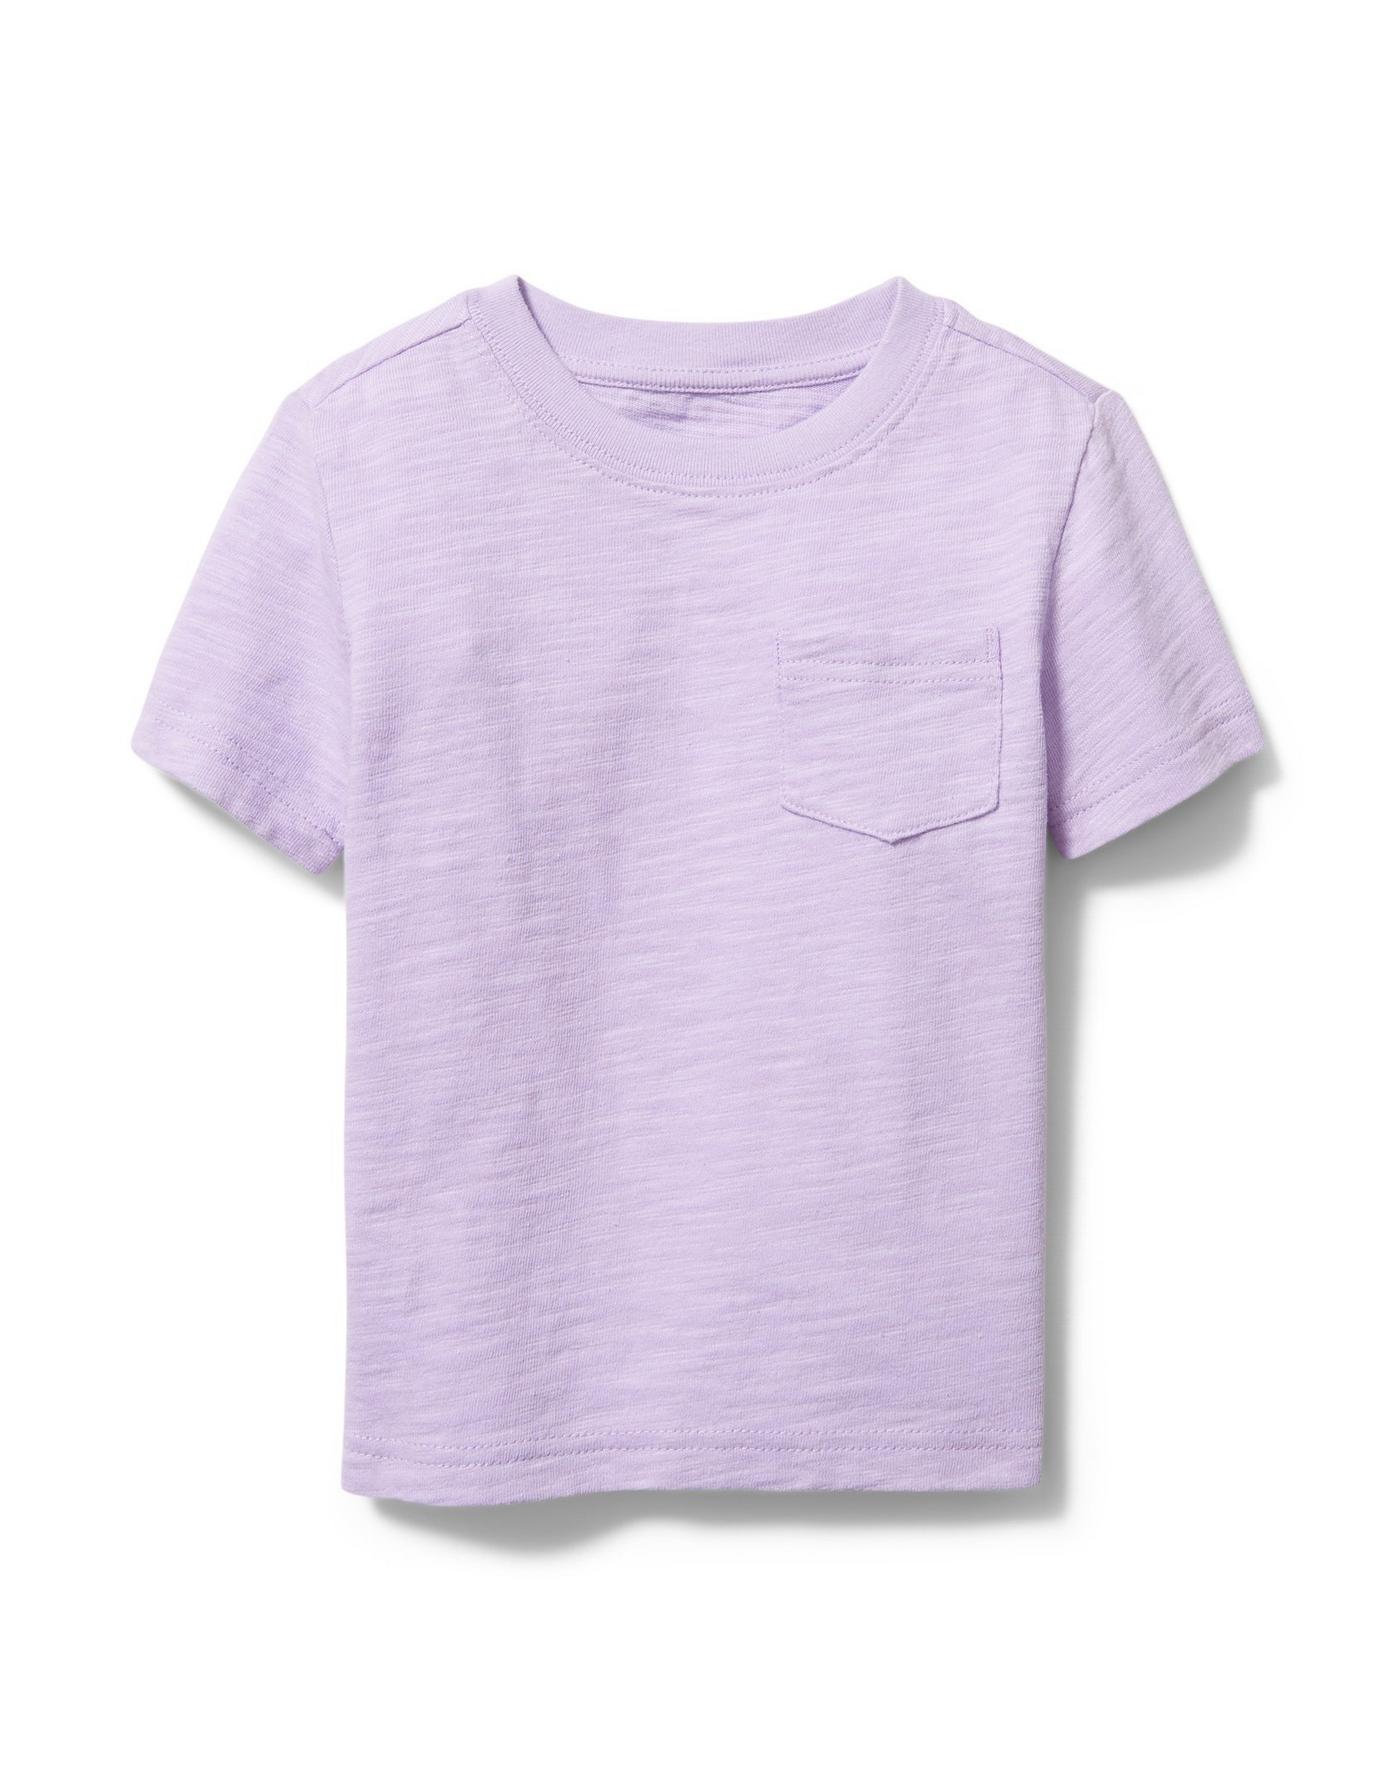 sibling matching spring outfits, purple pocket tee